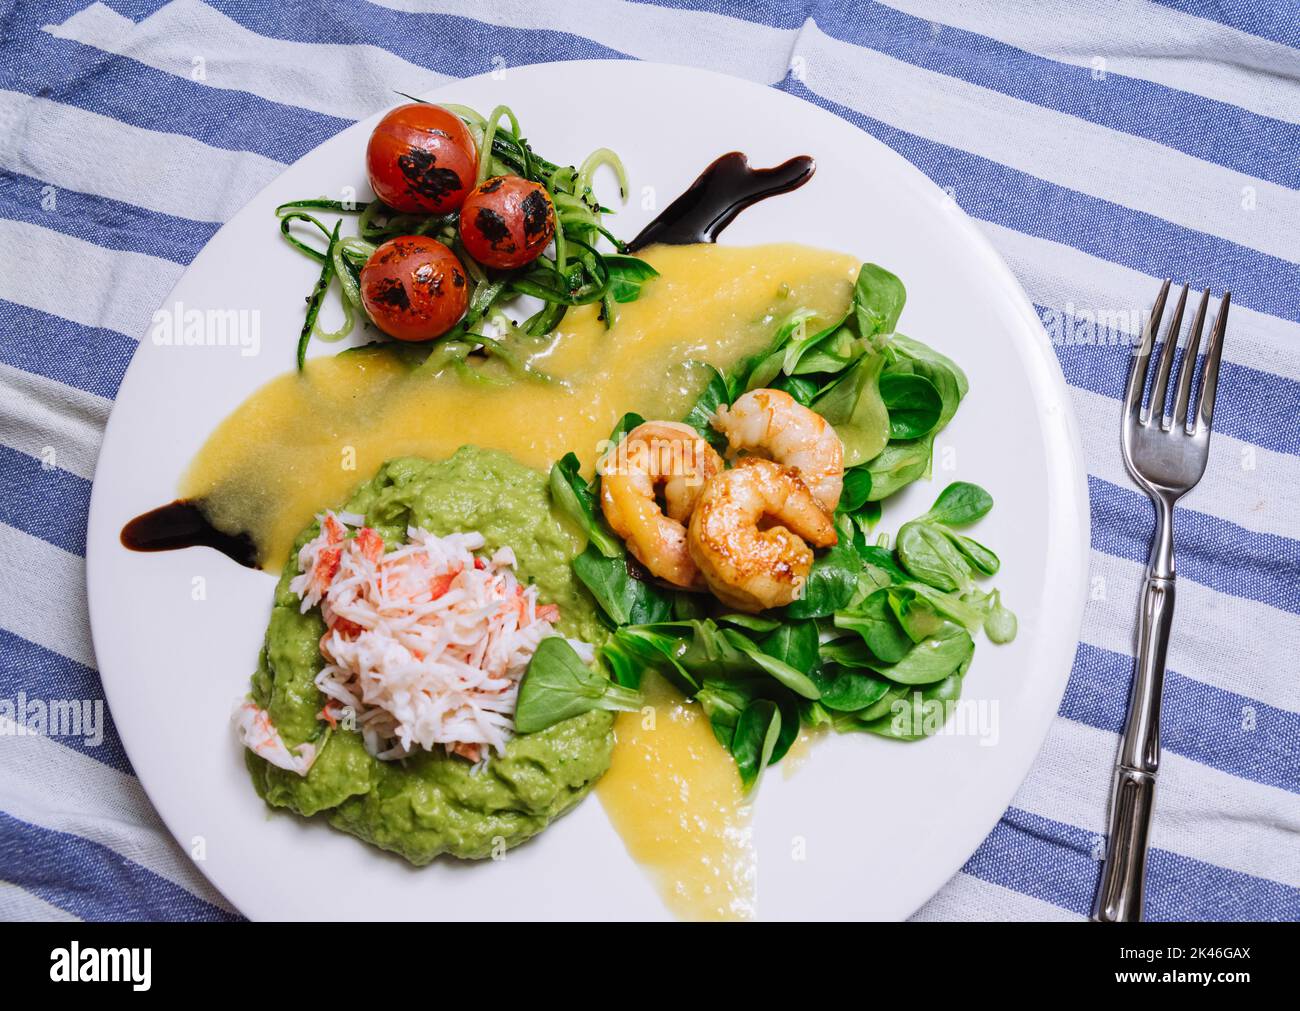 Salad with crab, cucumber, cocktail shrimp, avocado tartar and mango sauce. View from slightly above. Fresh and juicy foods. Homemade mouthwatering fo Stock Photo